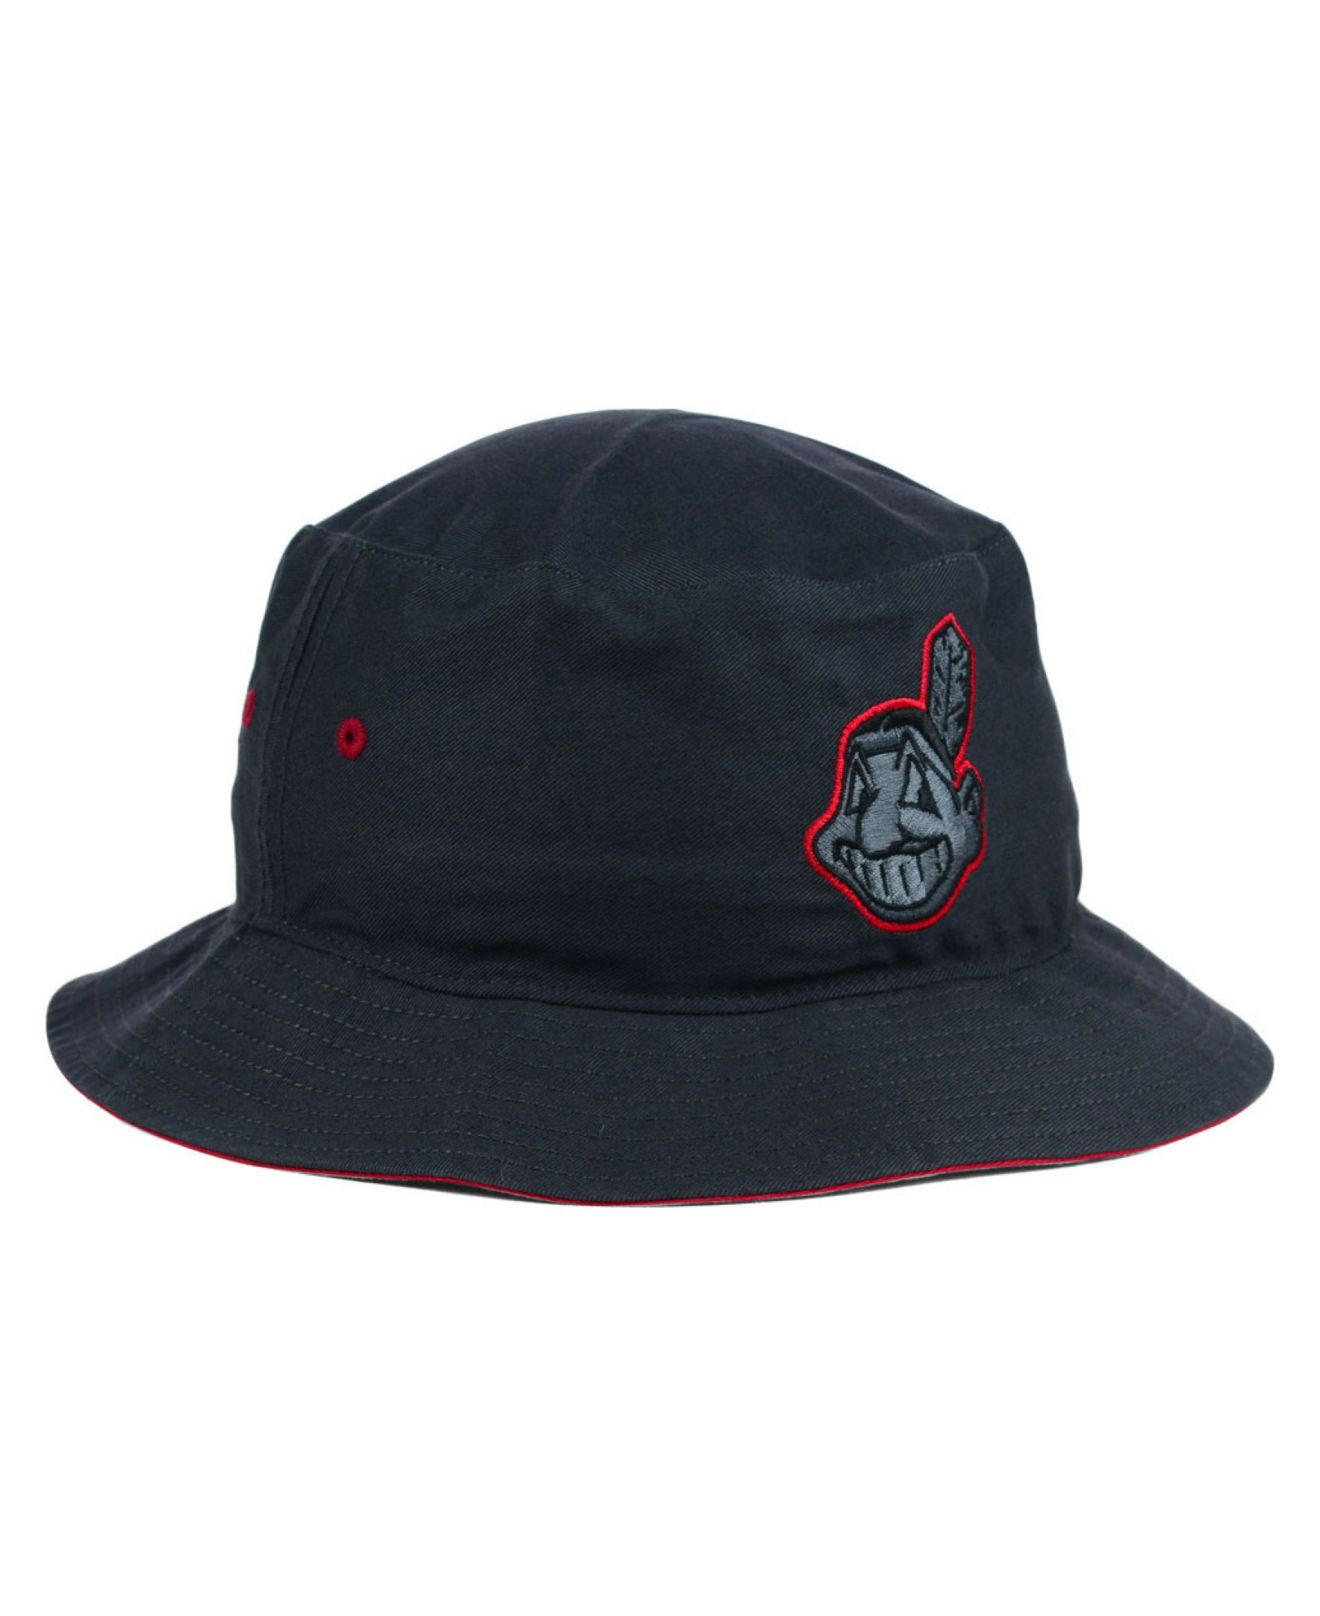 Lyst - 47 Brand Cleveland Indians Turbo Bucket Hat in Gray for Men